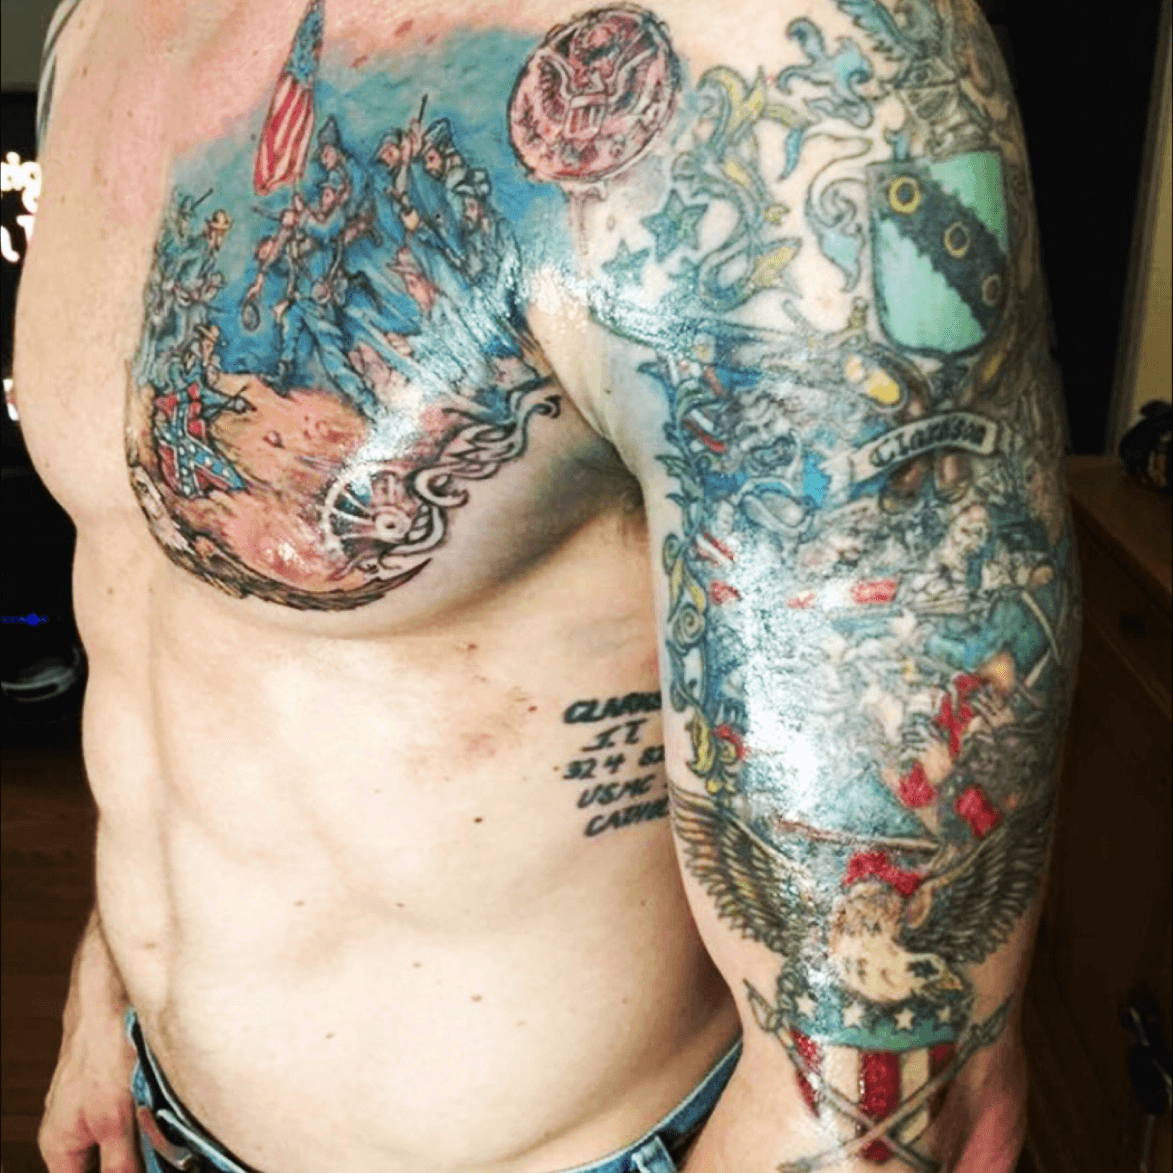 NFL Draftee Claims He Thought Three Percenter Tattoo Was a Military  Support Symbol  Militarycom